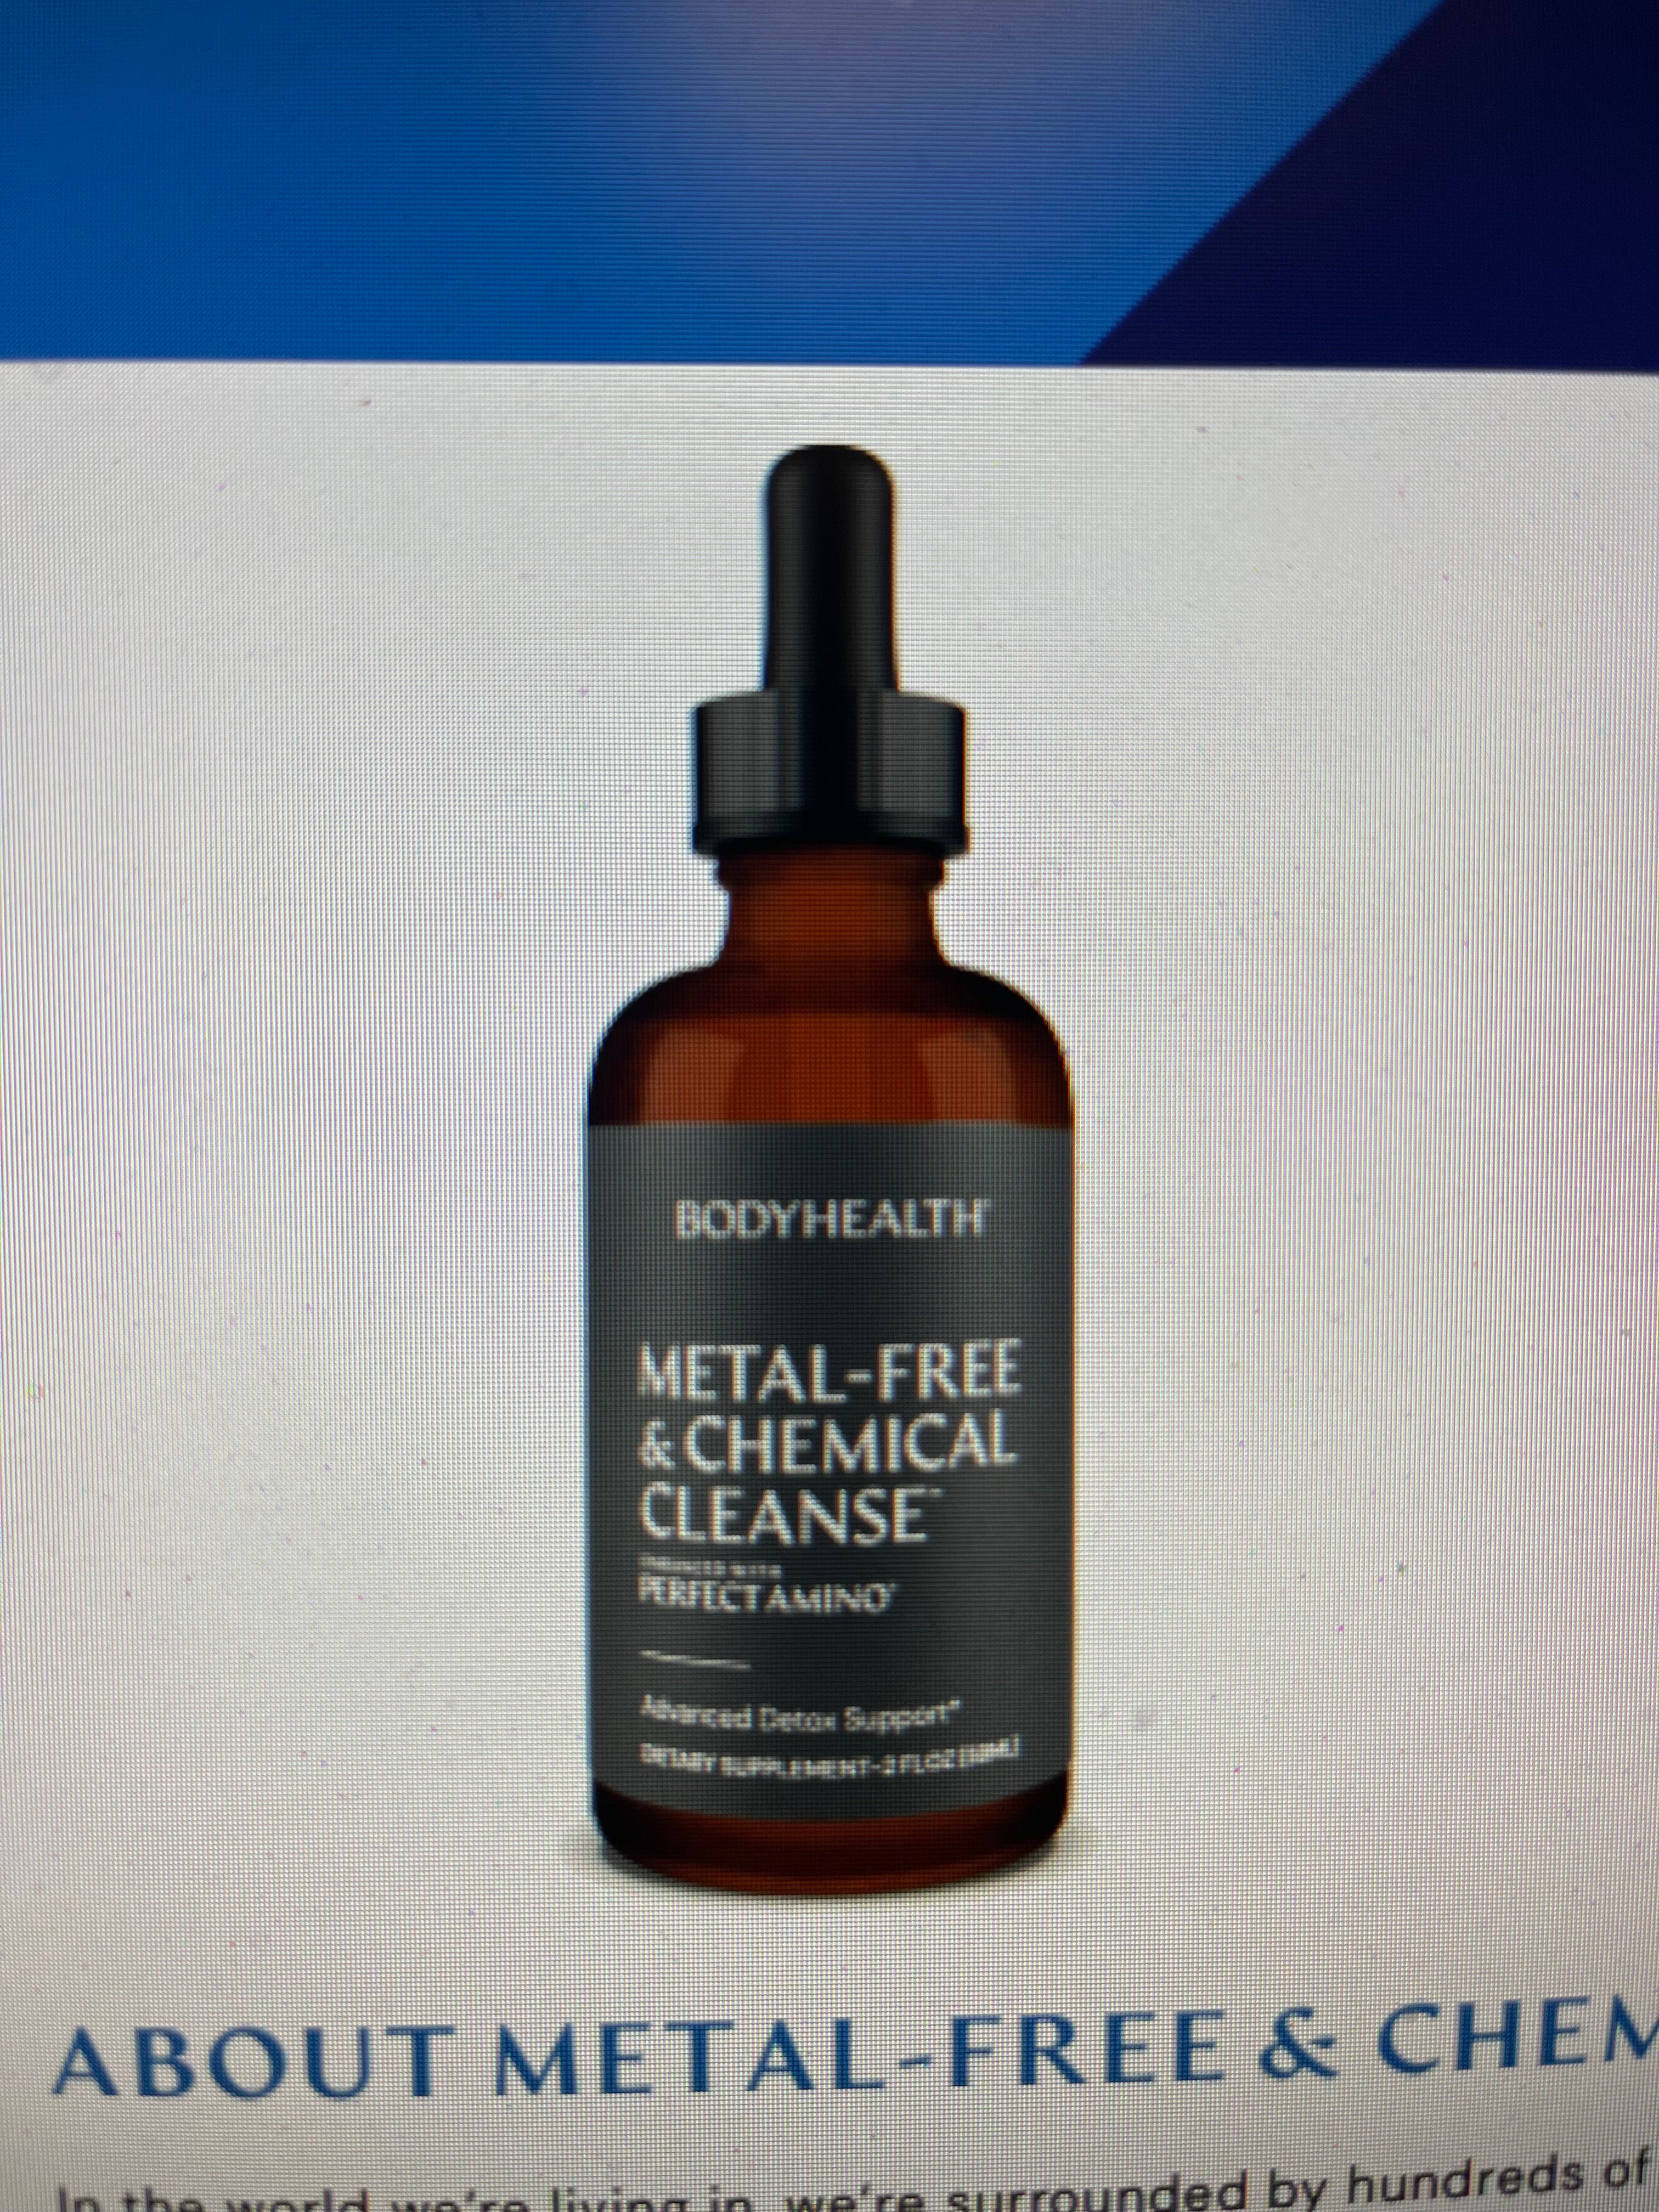 Metal-Free and Chemical Cleanse